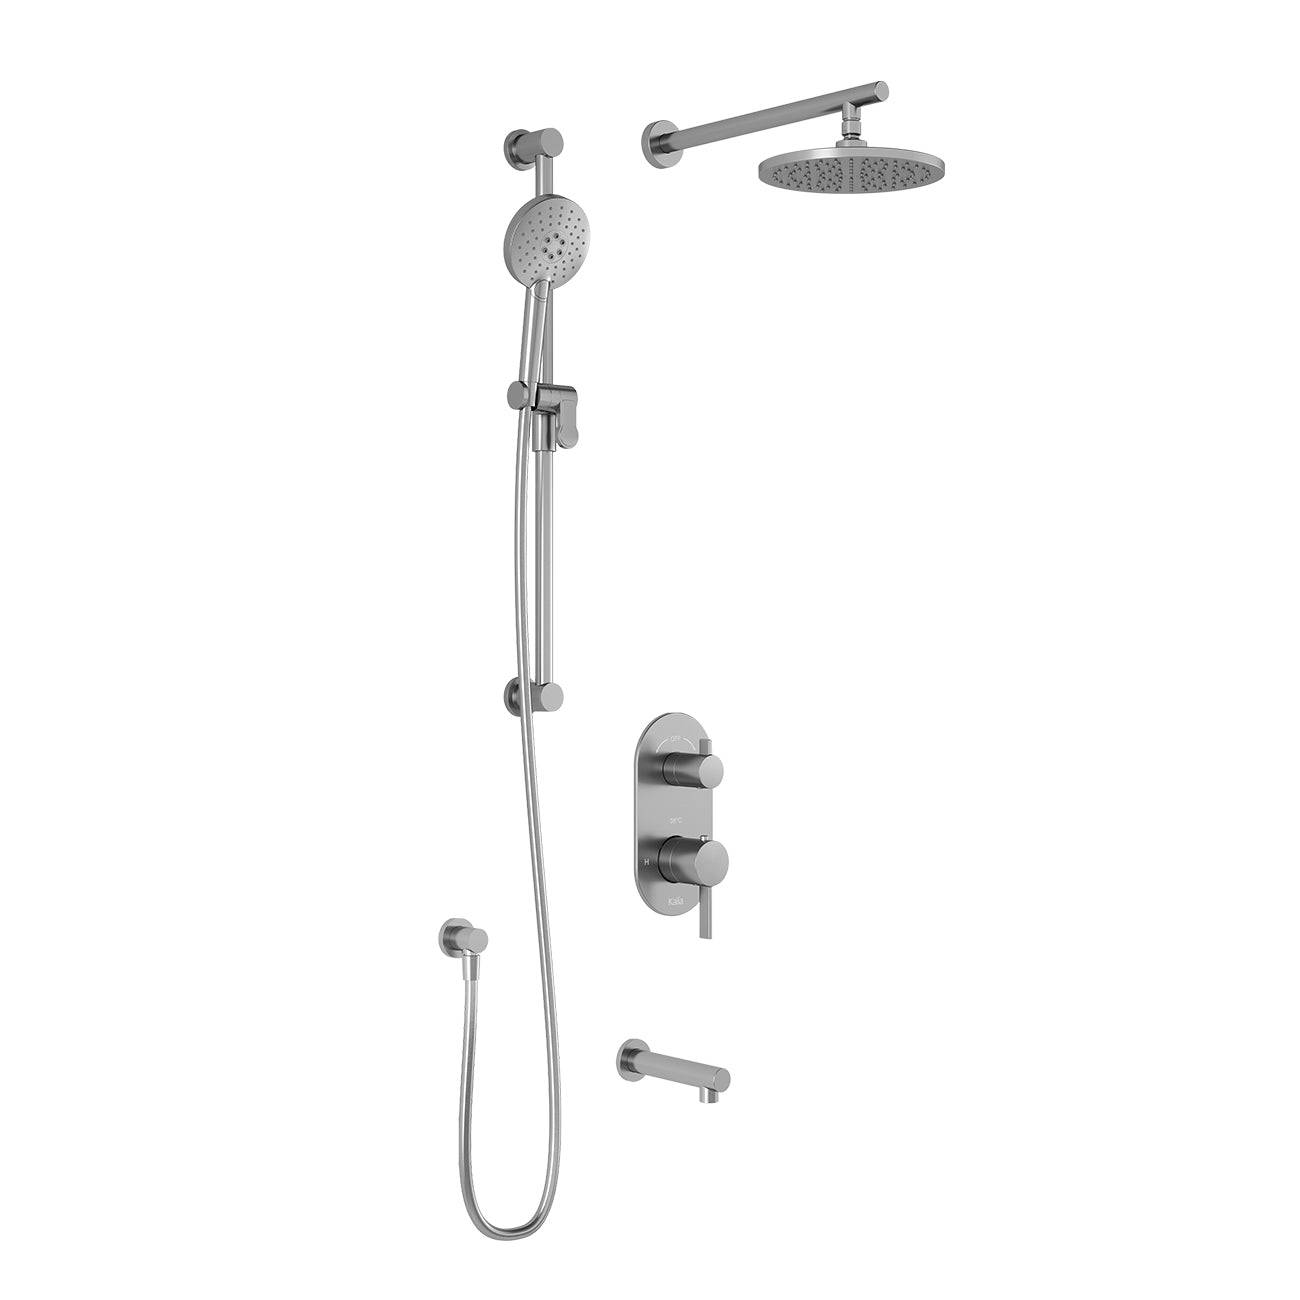 Kalia RoundOne TD3 : AQUATONIK T/P with Diverter Shower System with 9" Round Shower Head with Wall Arm- Chrome